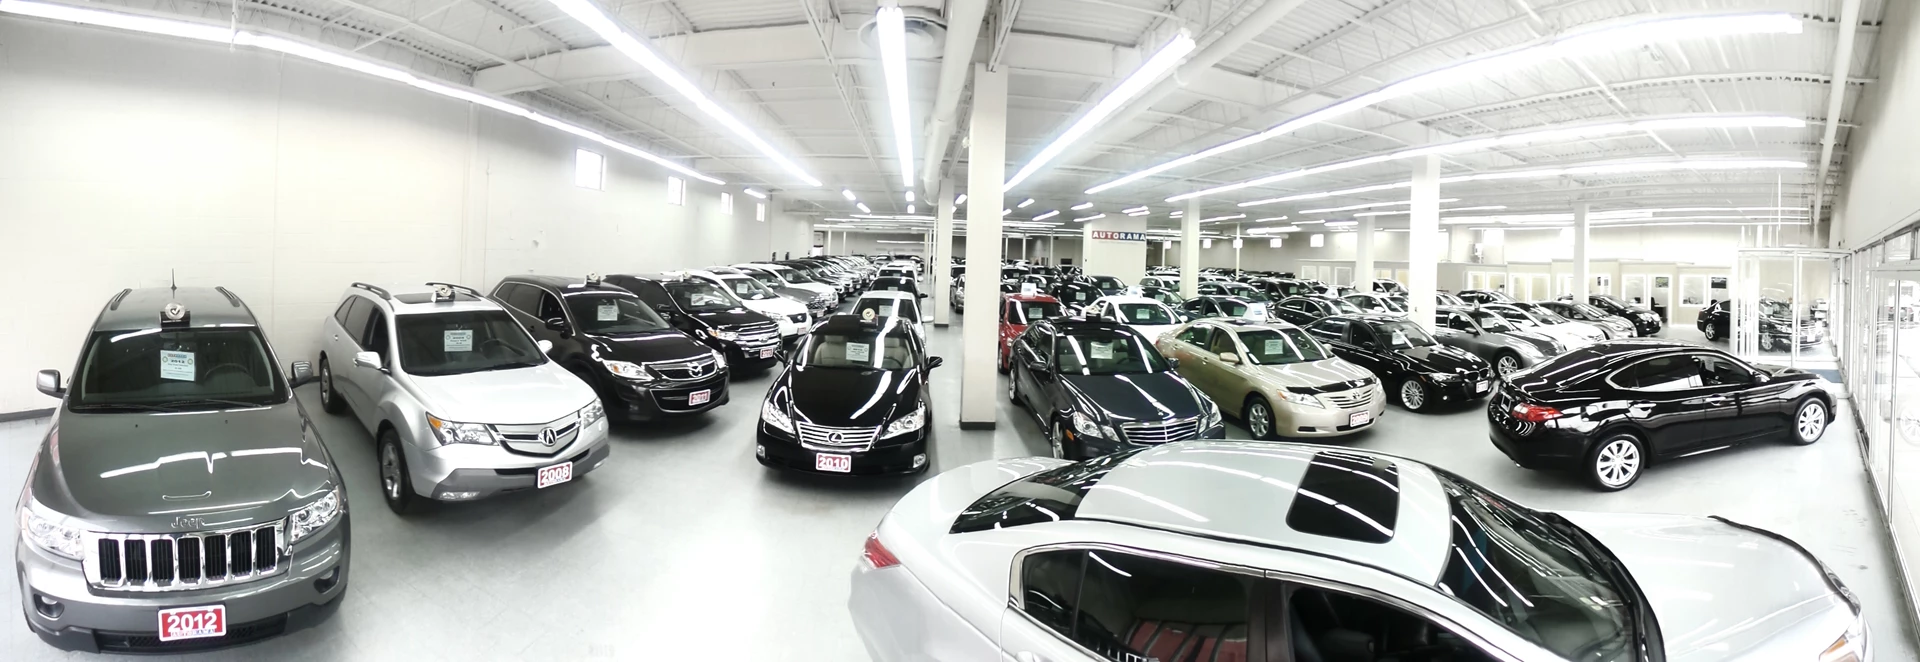 Virtual tour of car dealerships from around the world 